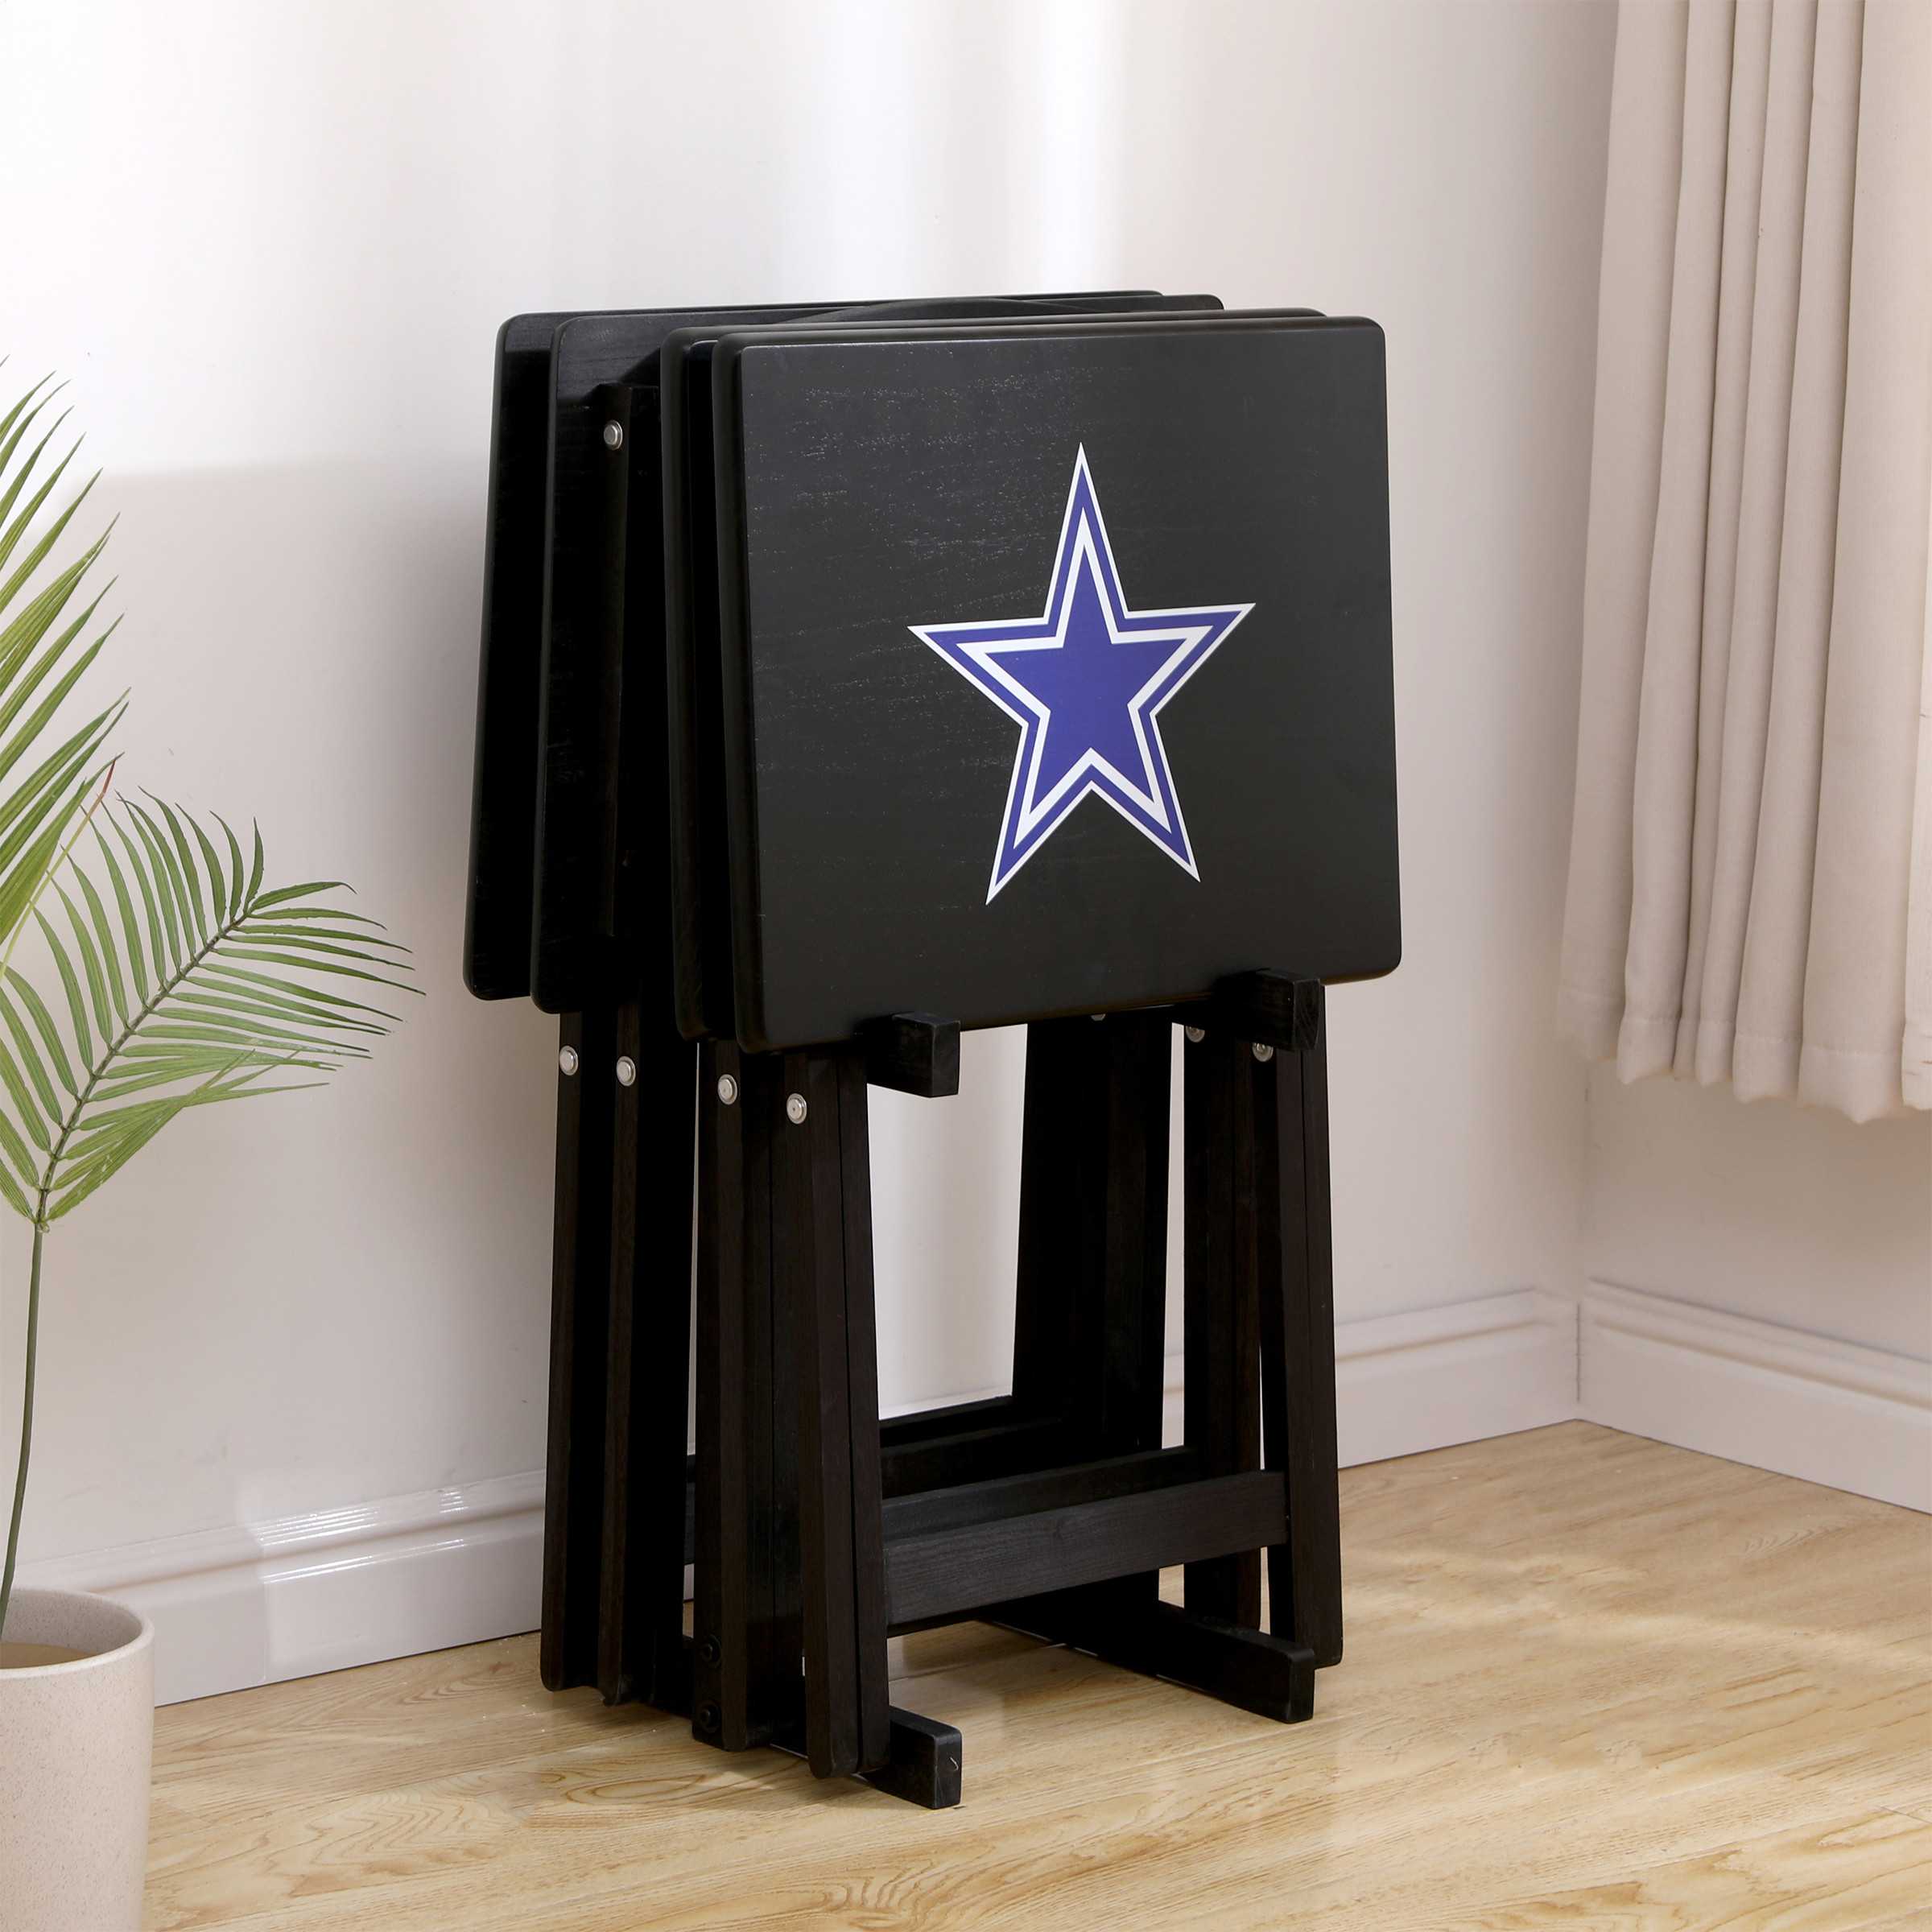 DALLAS COWBOYS 4 TV TRAYS WITH STAND